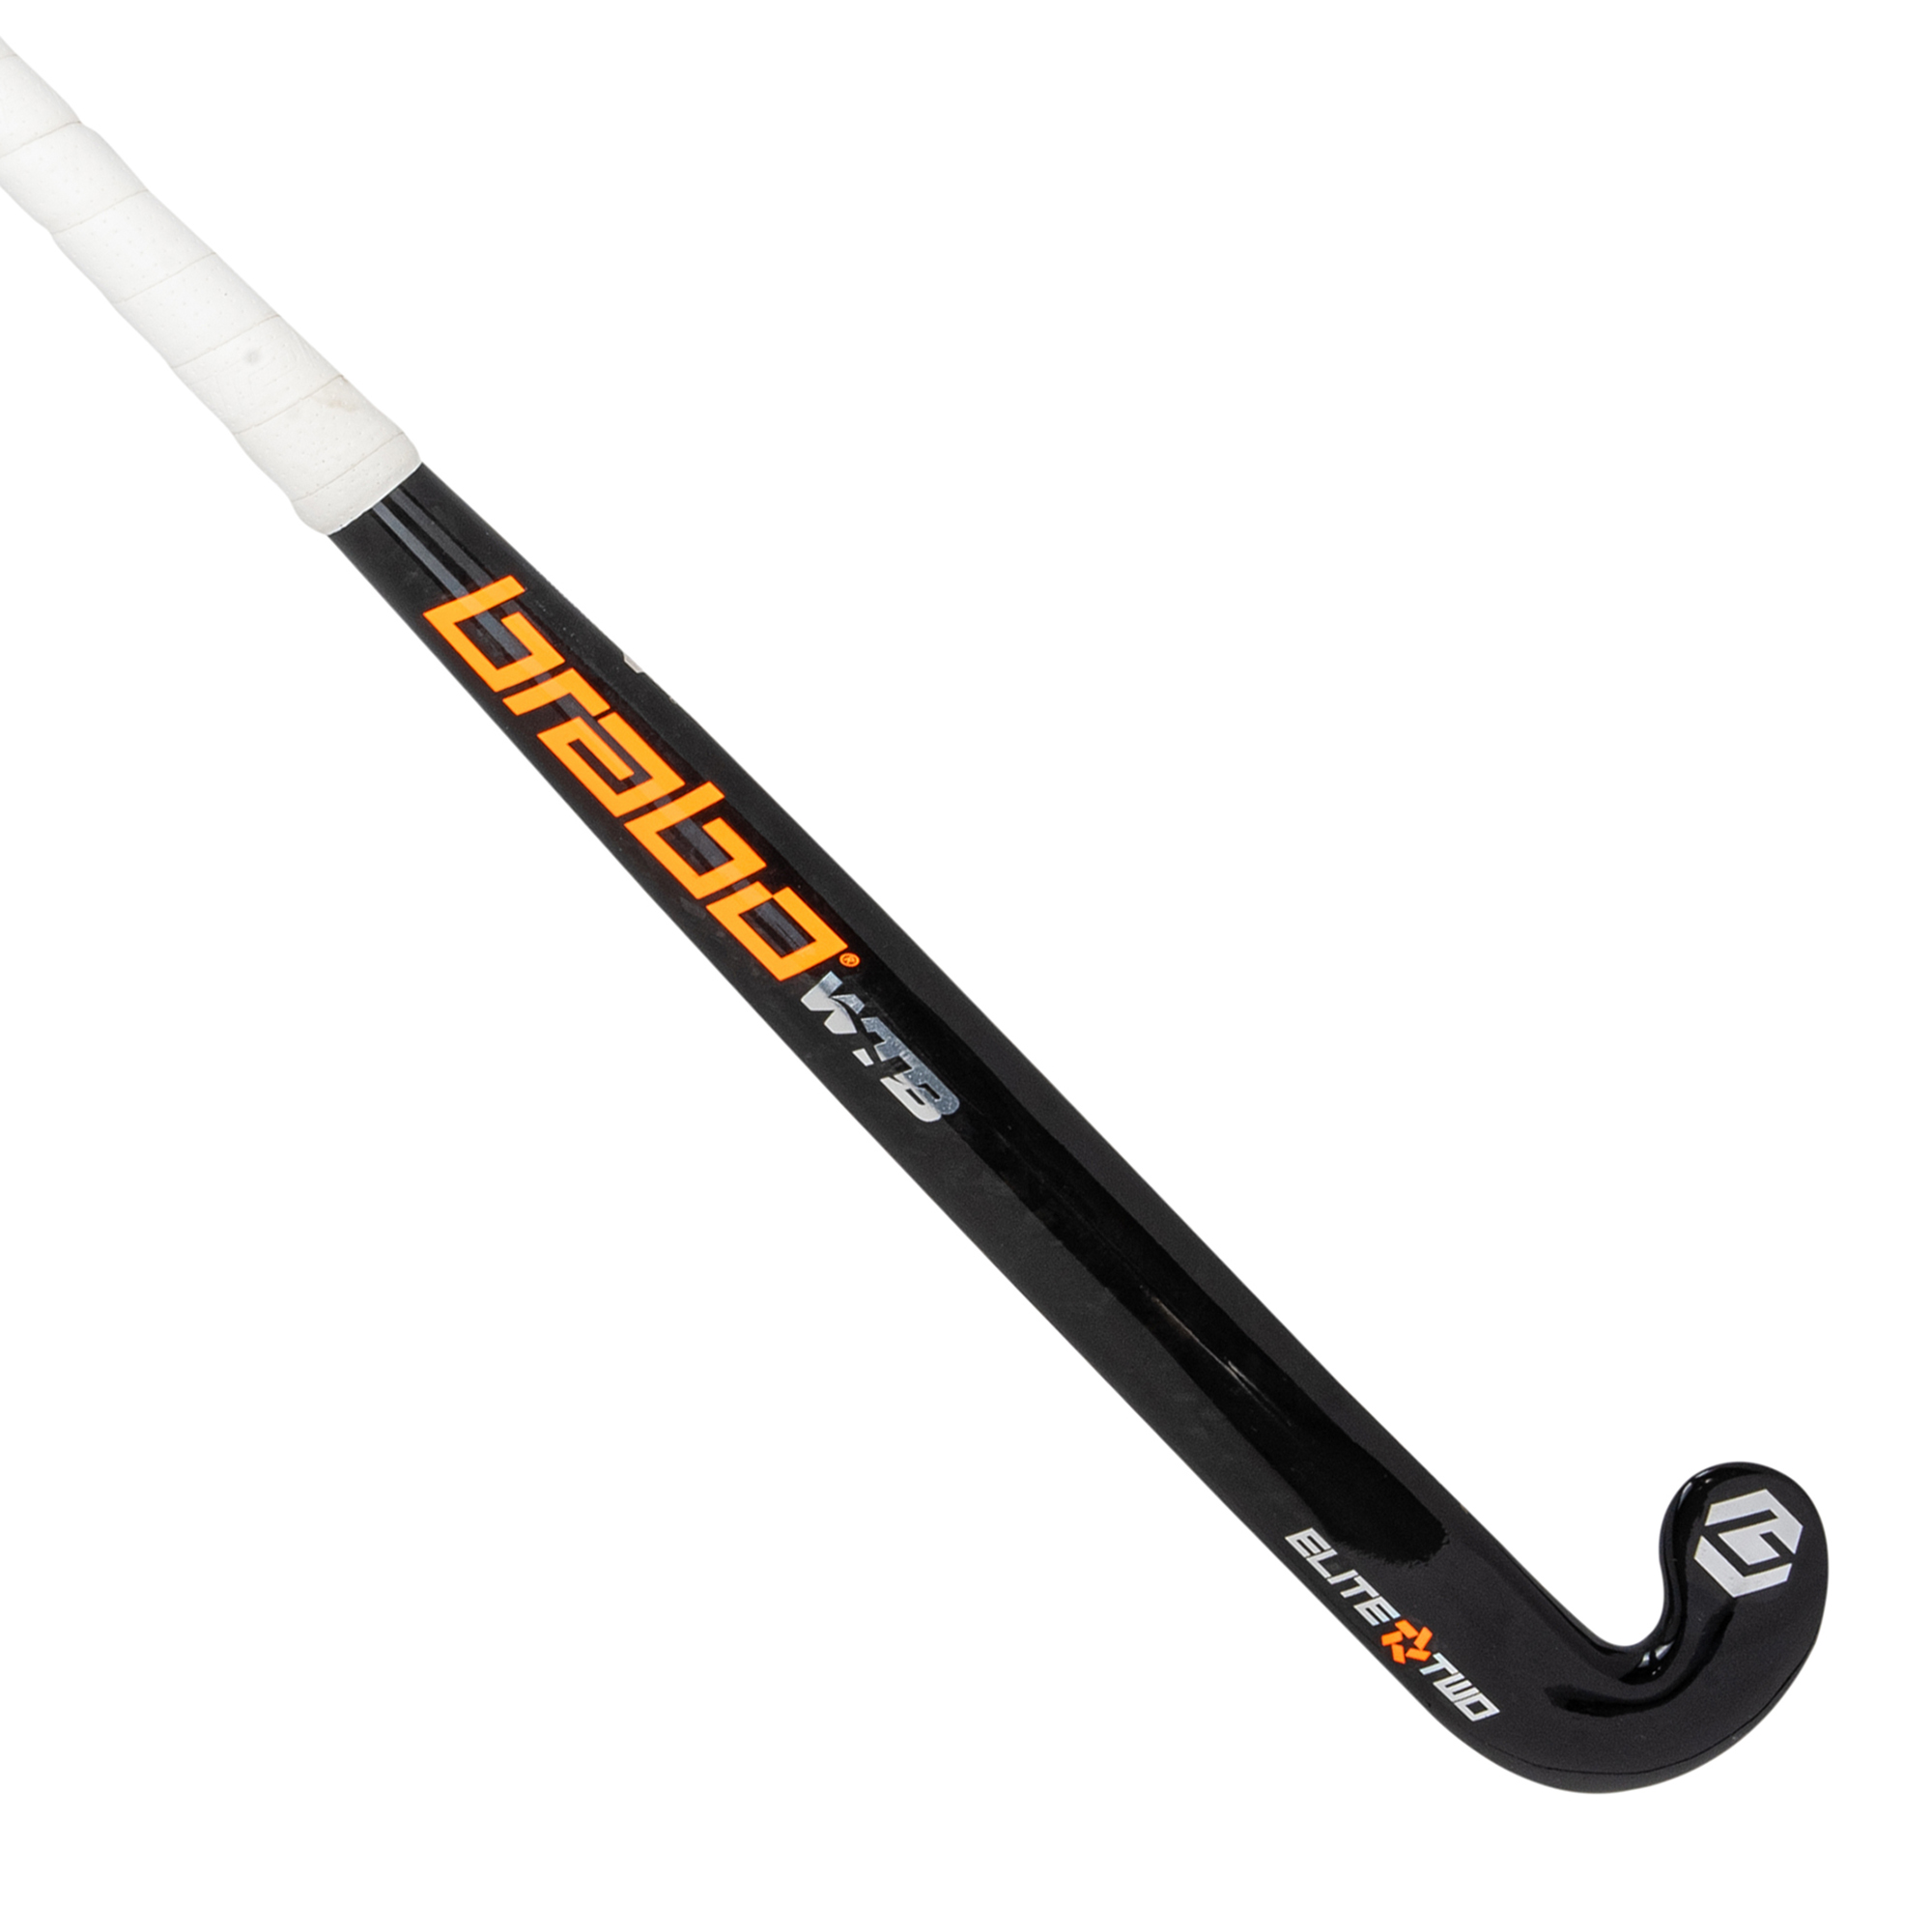 IT Elite 2 Forged Carbon Extreme Low Bow